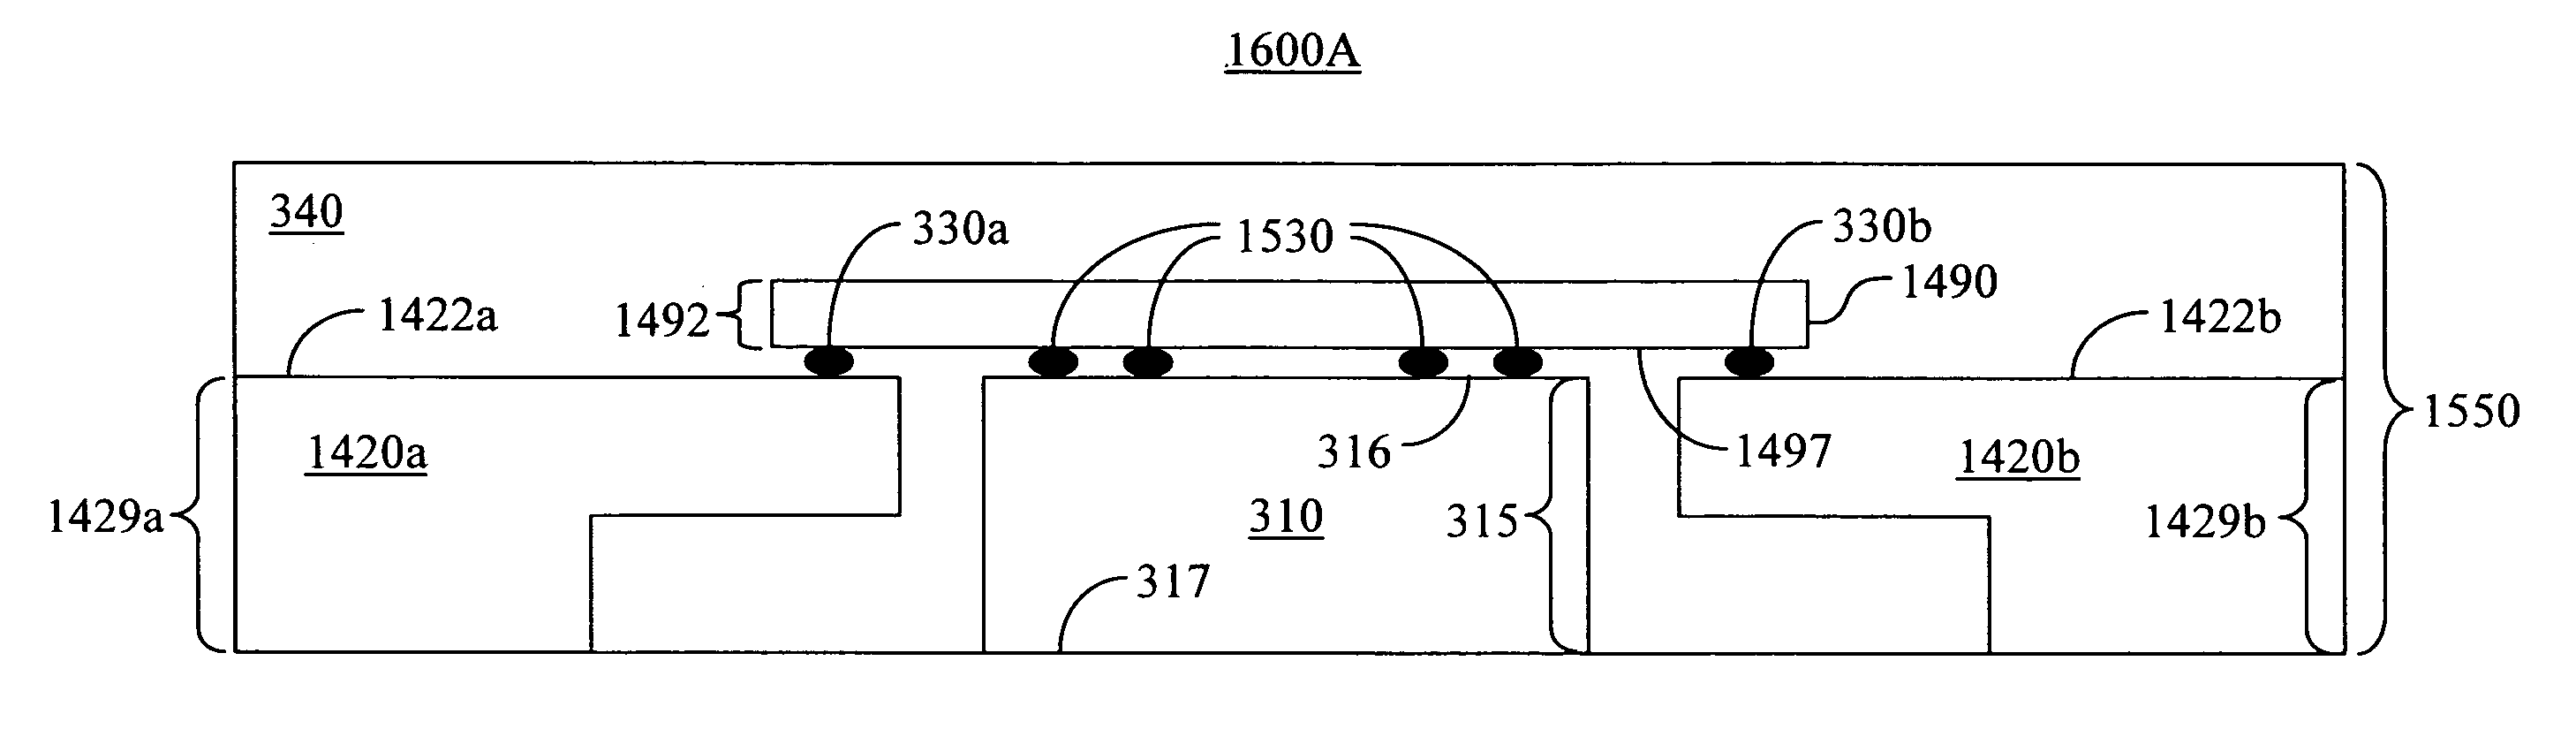 Semiconductor device packaging using etched leadfingers